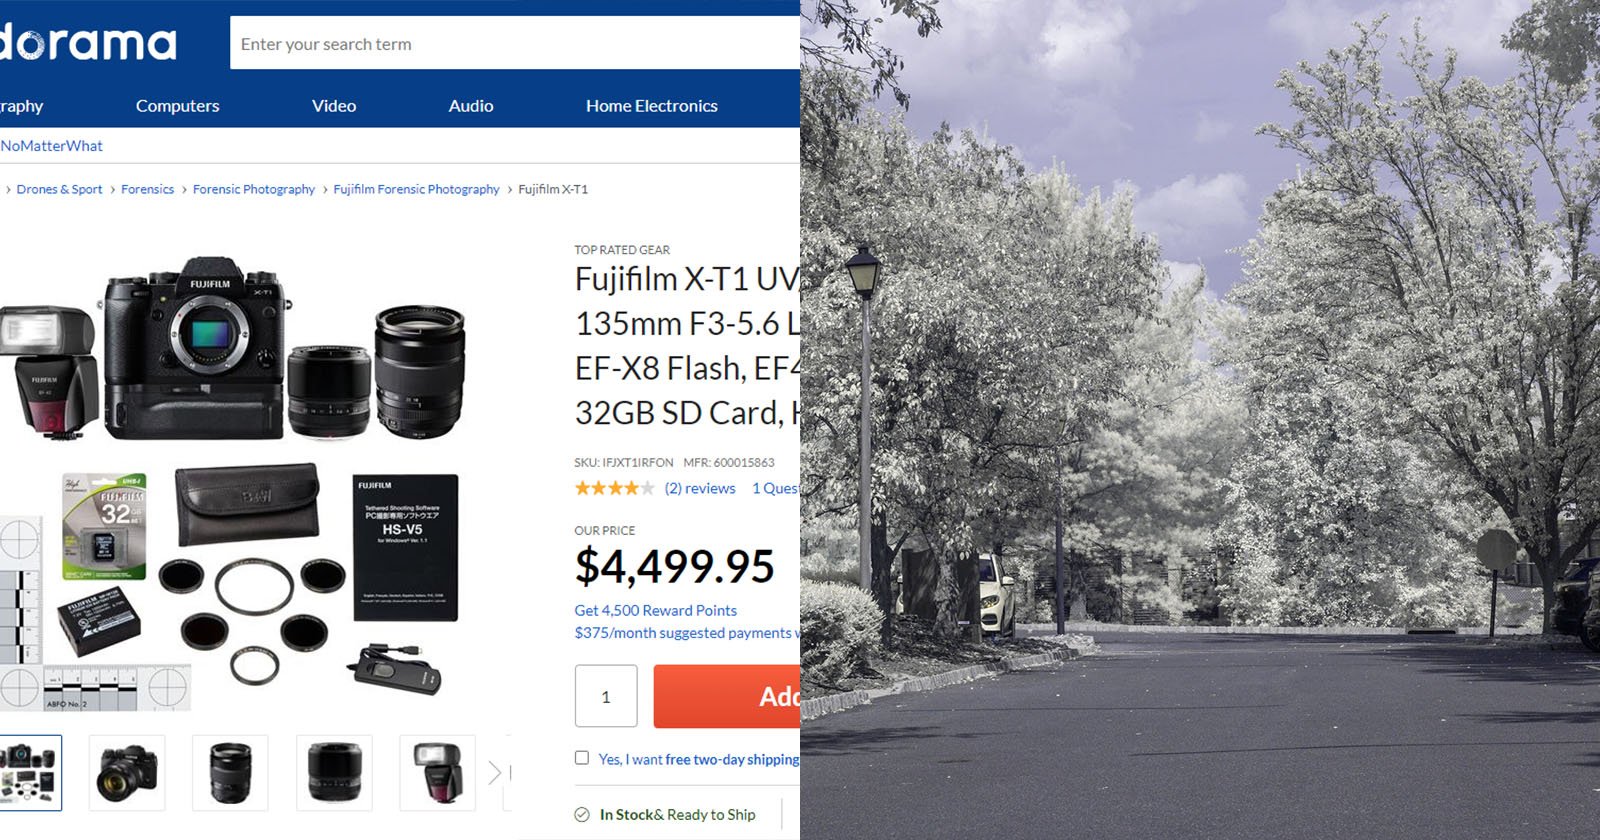 The $4.5K Fuji XT-1 Forensics Package Doesnt Really Create UV Photos